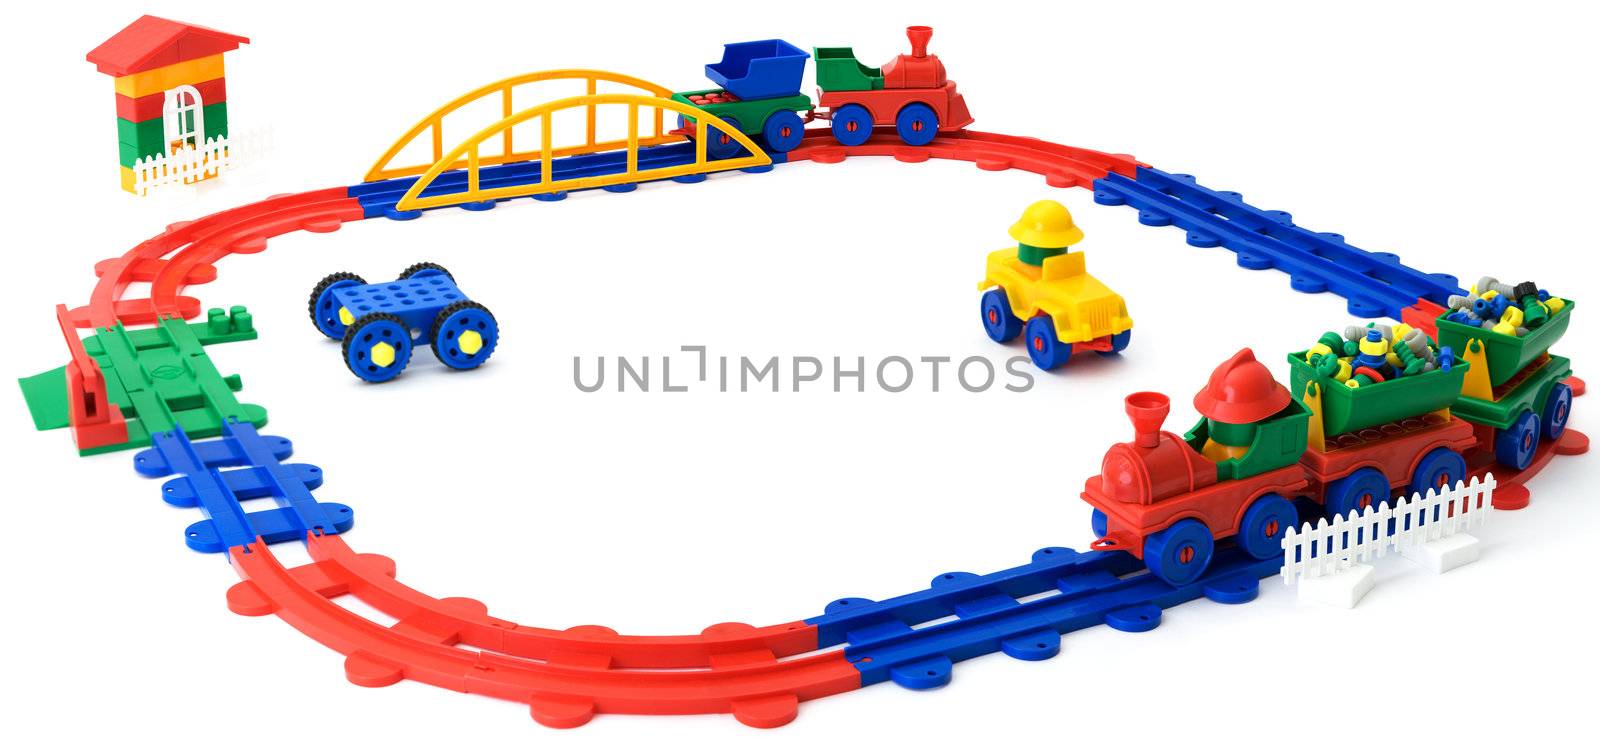 Plastic colour railway on a white background by pzaxe